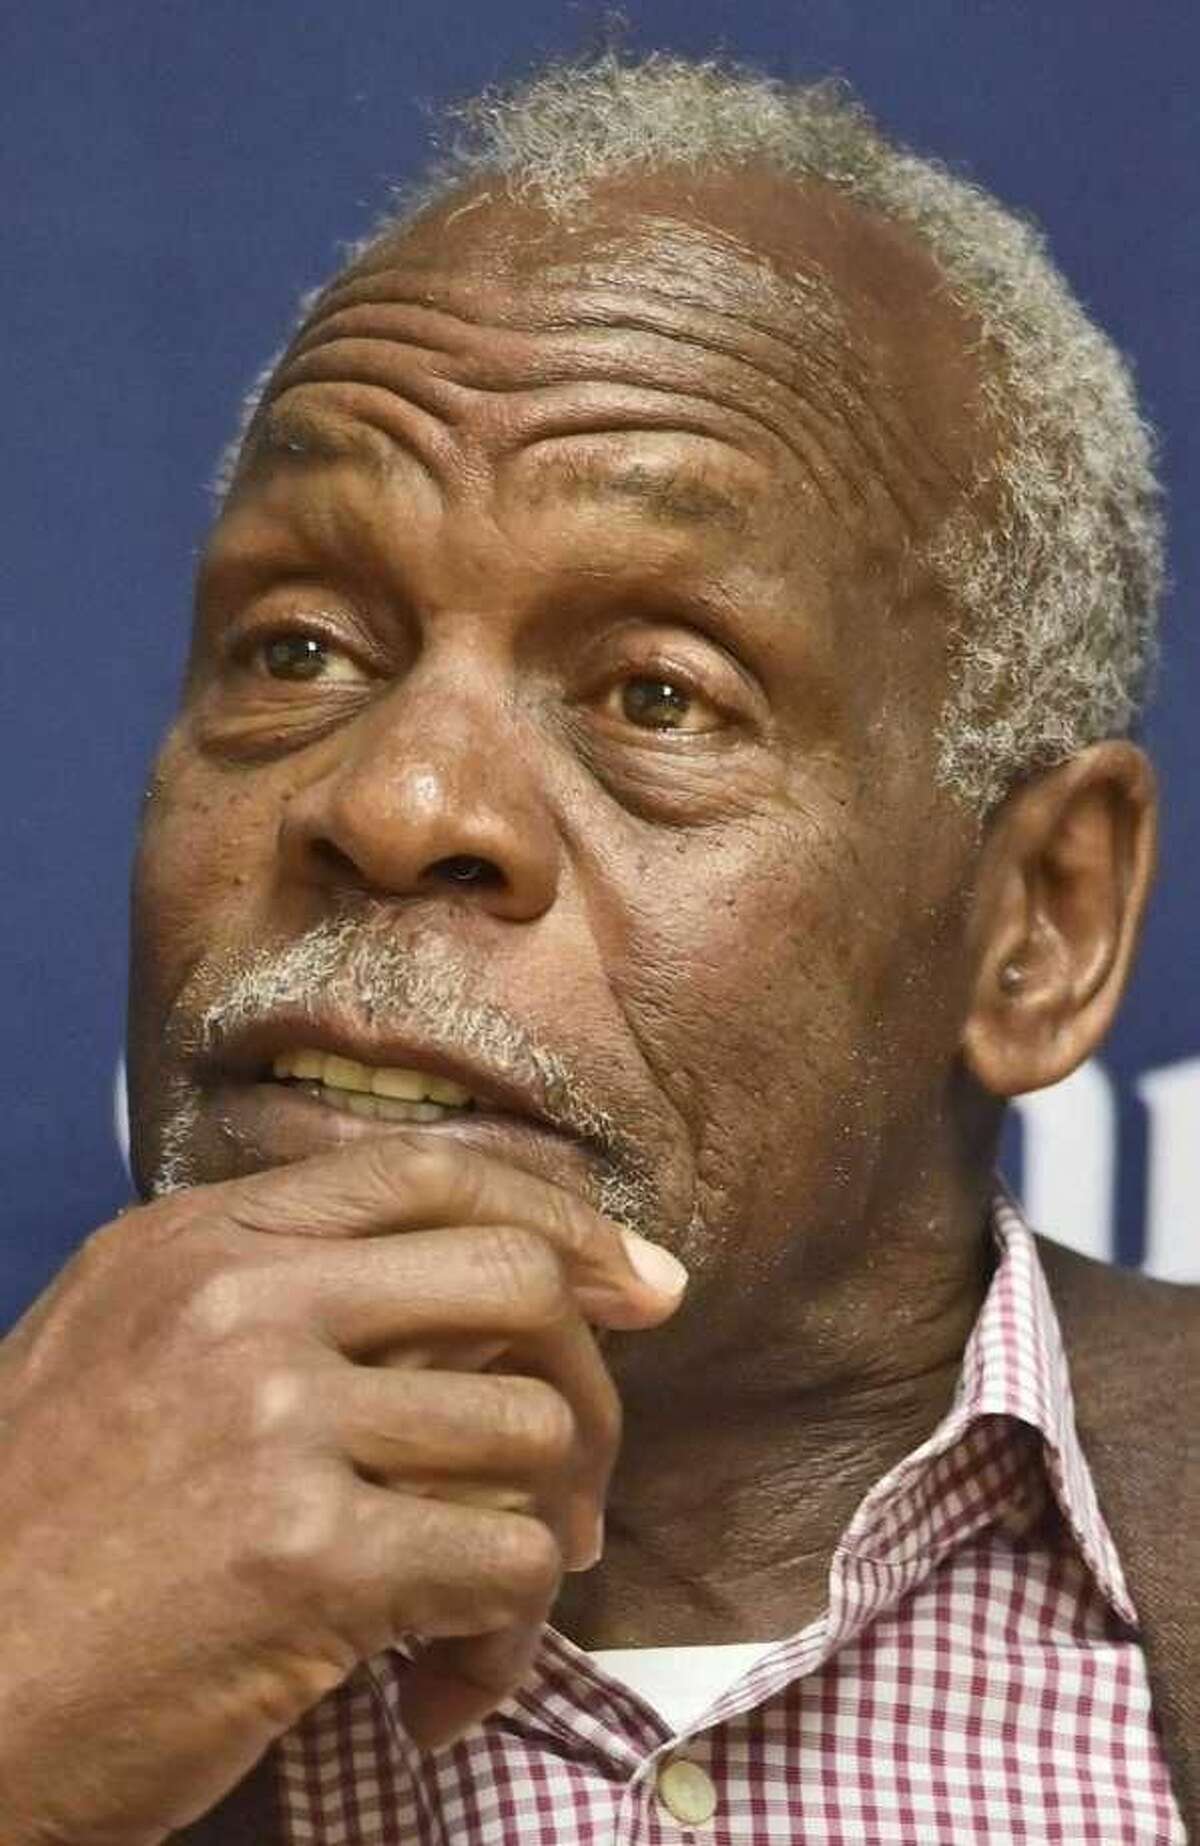 Actor and activist Danny Glover is seen during a news conference before speaking at Quinnipiac University in Hamden.